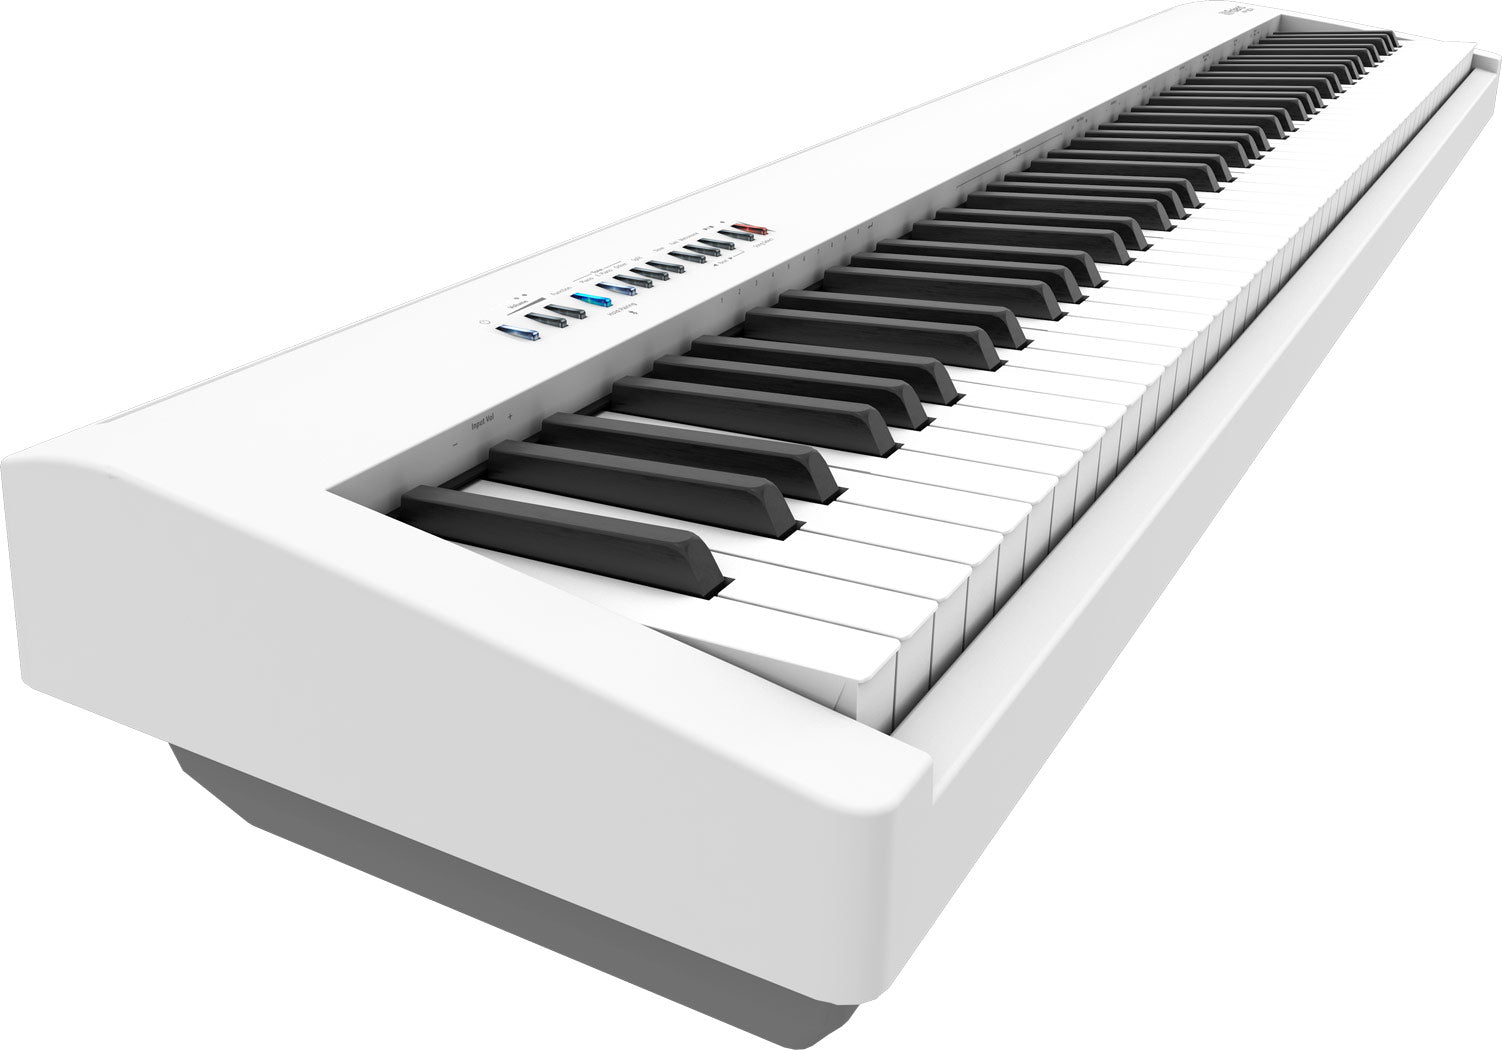 ROLAND FP-30X DIGITAL PIANO WITH BLUETOOTH WHITE COLOR FREE DAMPER PEDAL & RH5 HEADPHONE & NOTE STAND  (NO WOOD STAND VERSION/ FP30X/ FP 30X), ROLAND, DIGITAL PIANO, roland-digital-piano-fp30xwh, ZOSO MUSIC SDN BHD